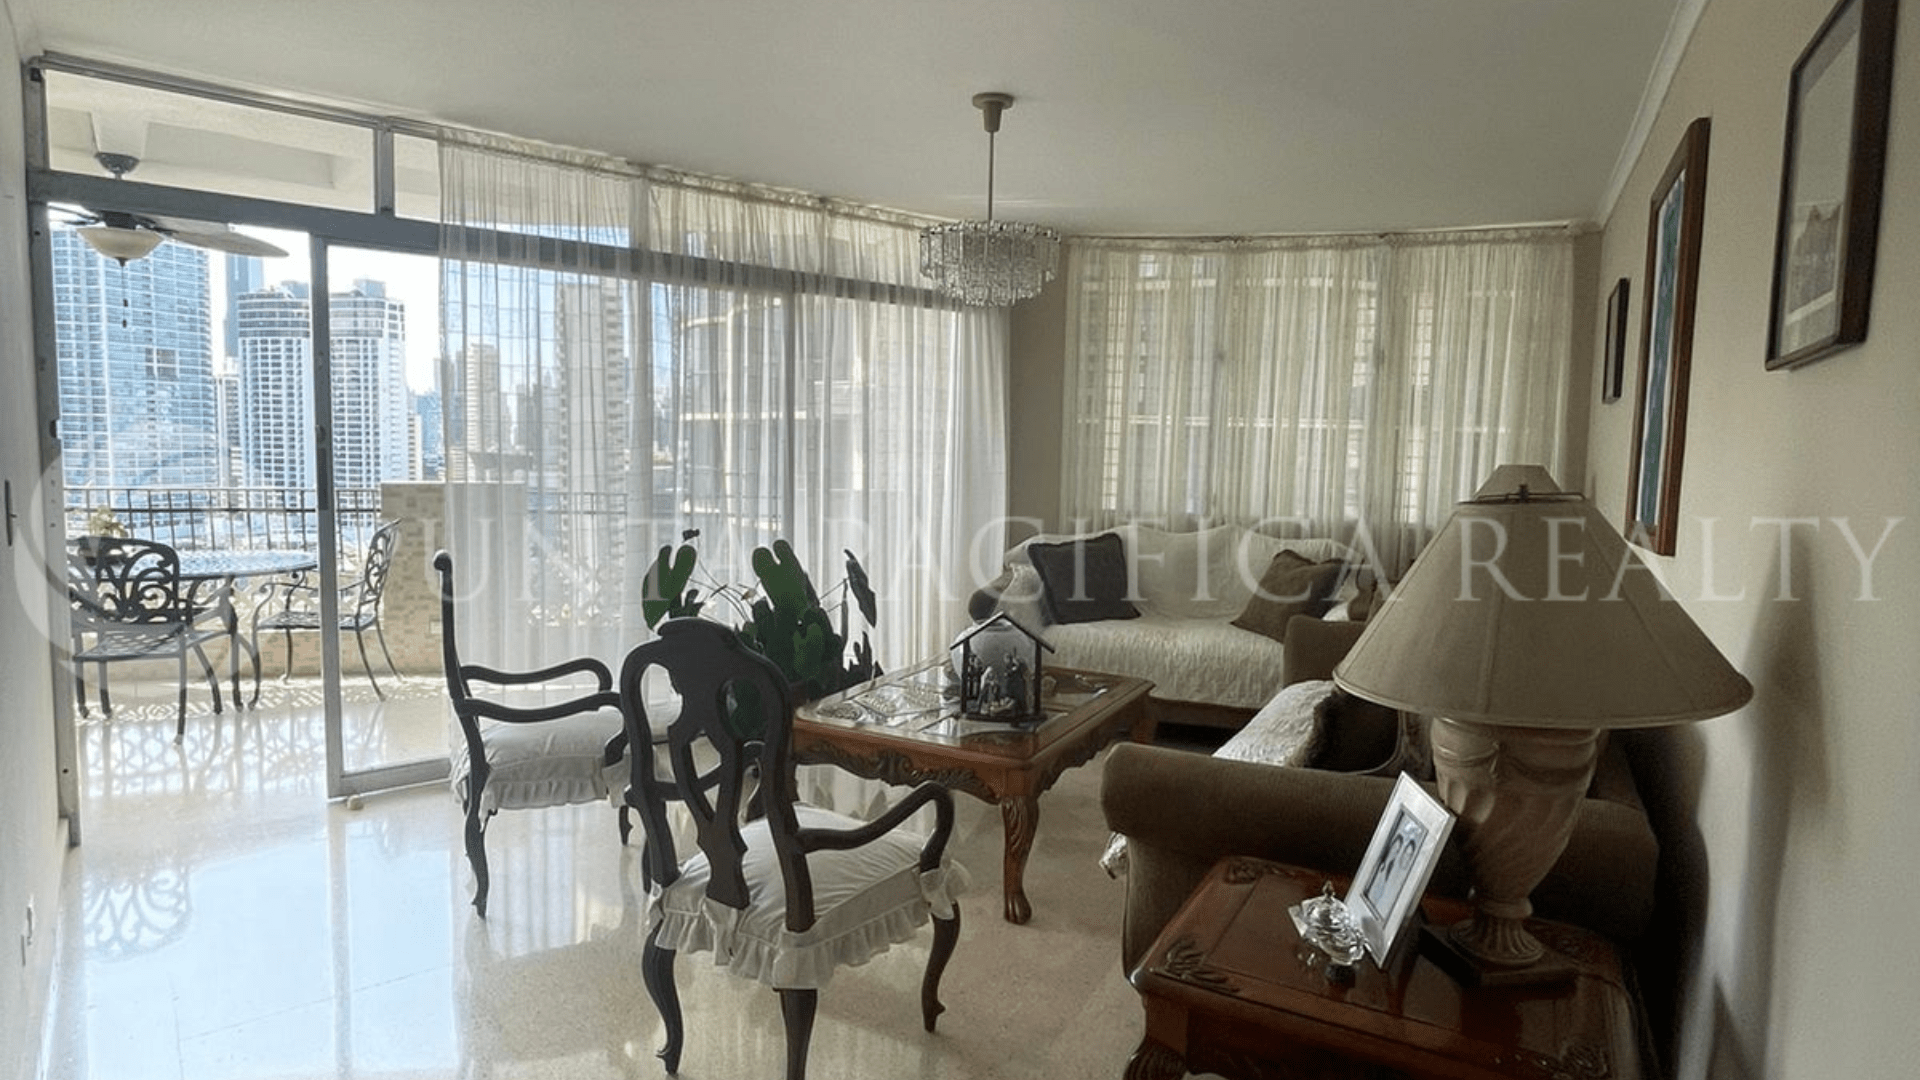 For Rent and For Sale | 3 Bedroom Apartment | Excellent Location ...